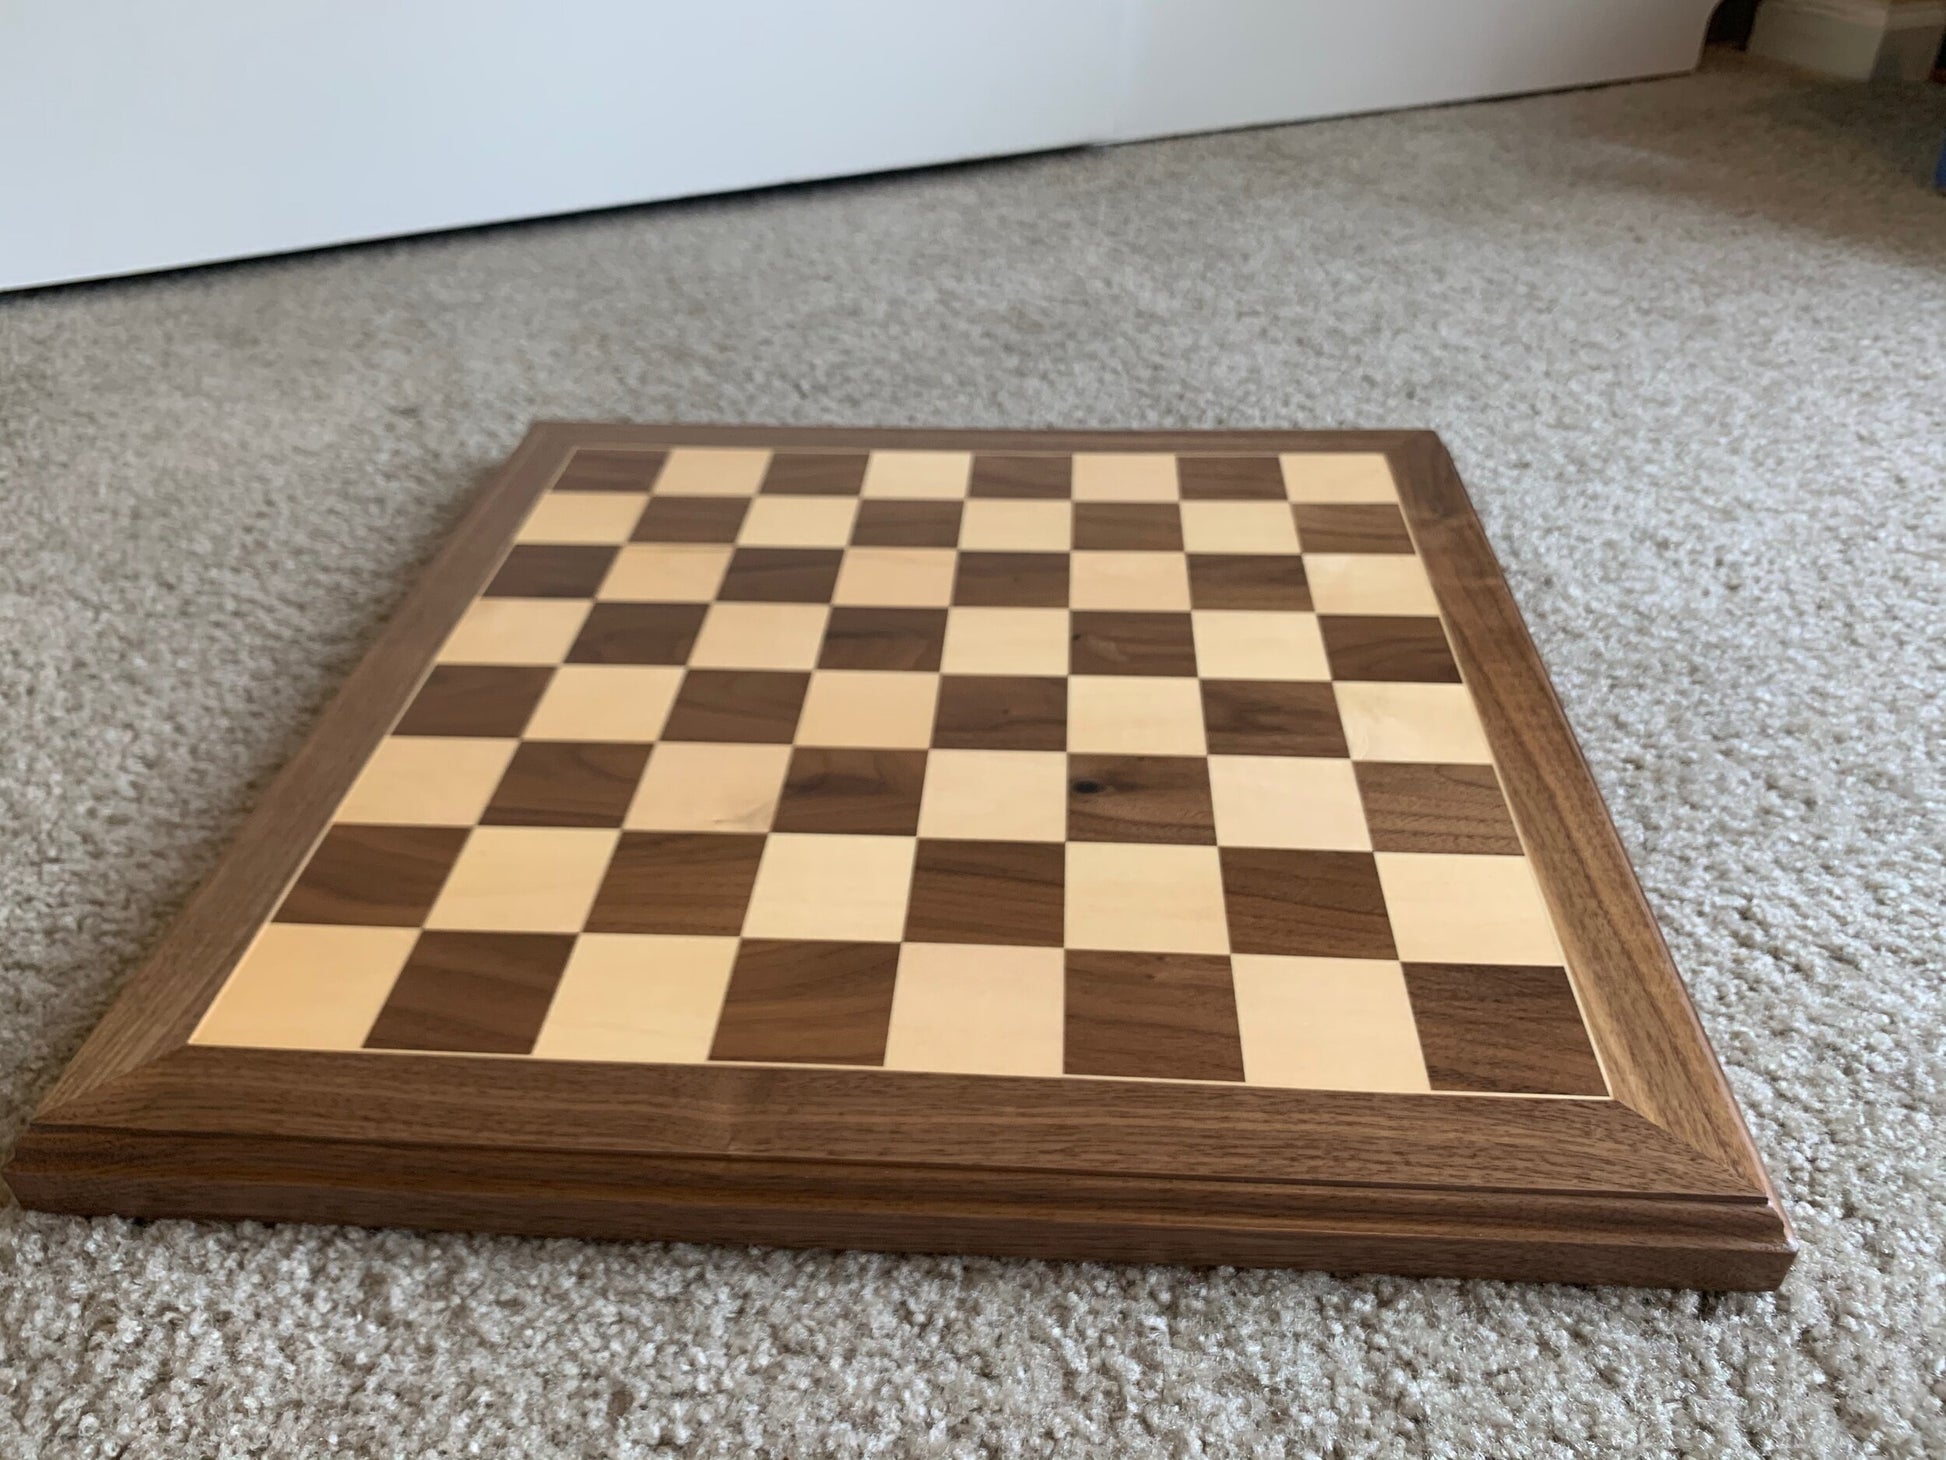 Spencley Design Co - SBEEB CHESS BOARD - PLANS